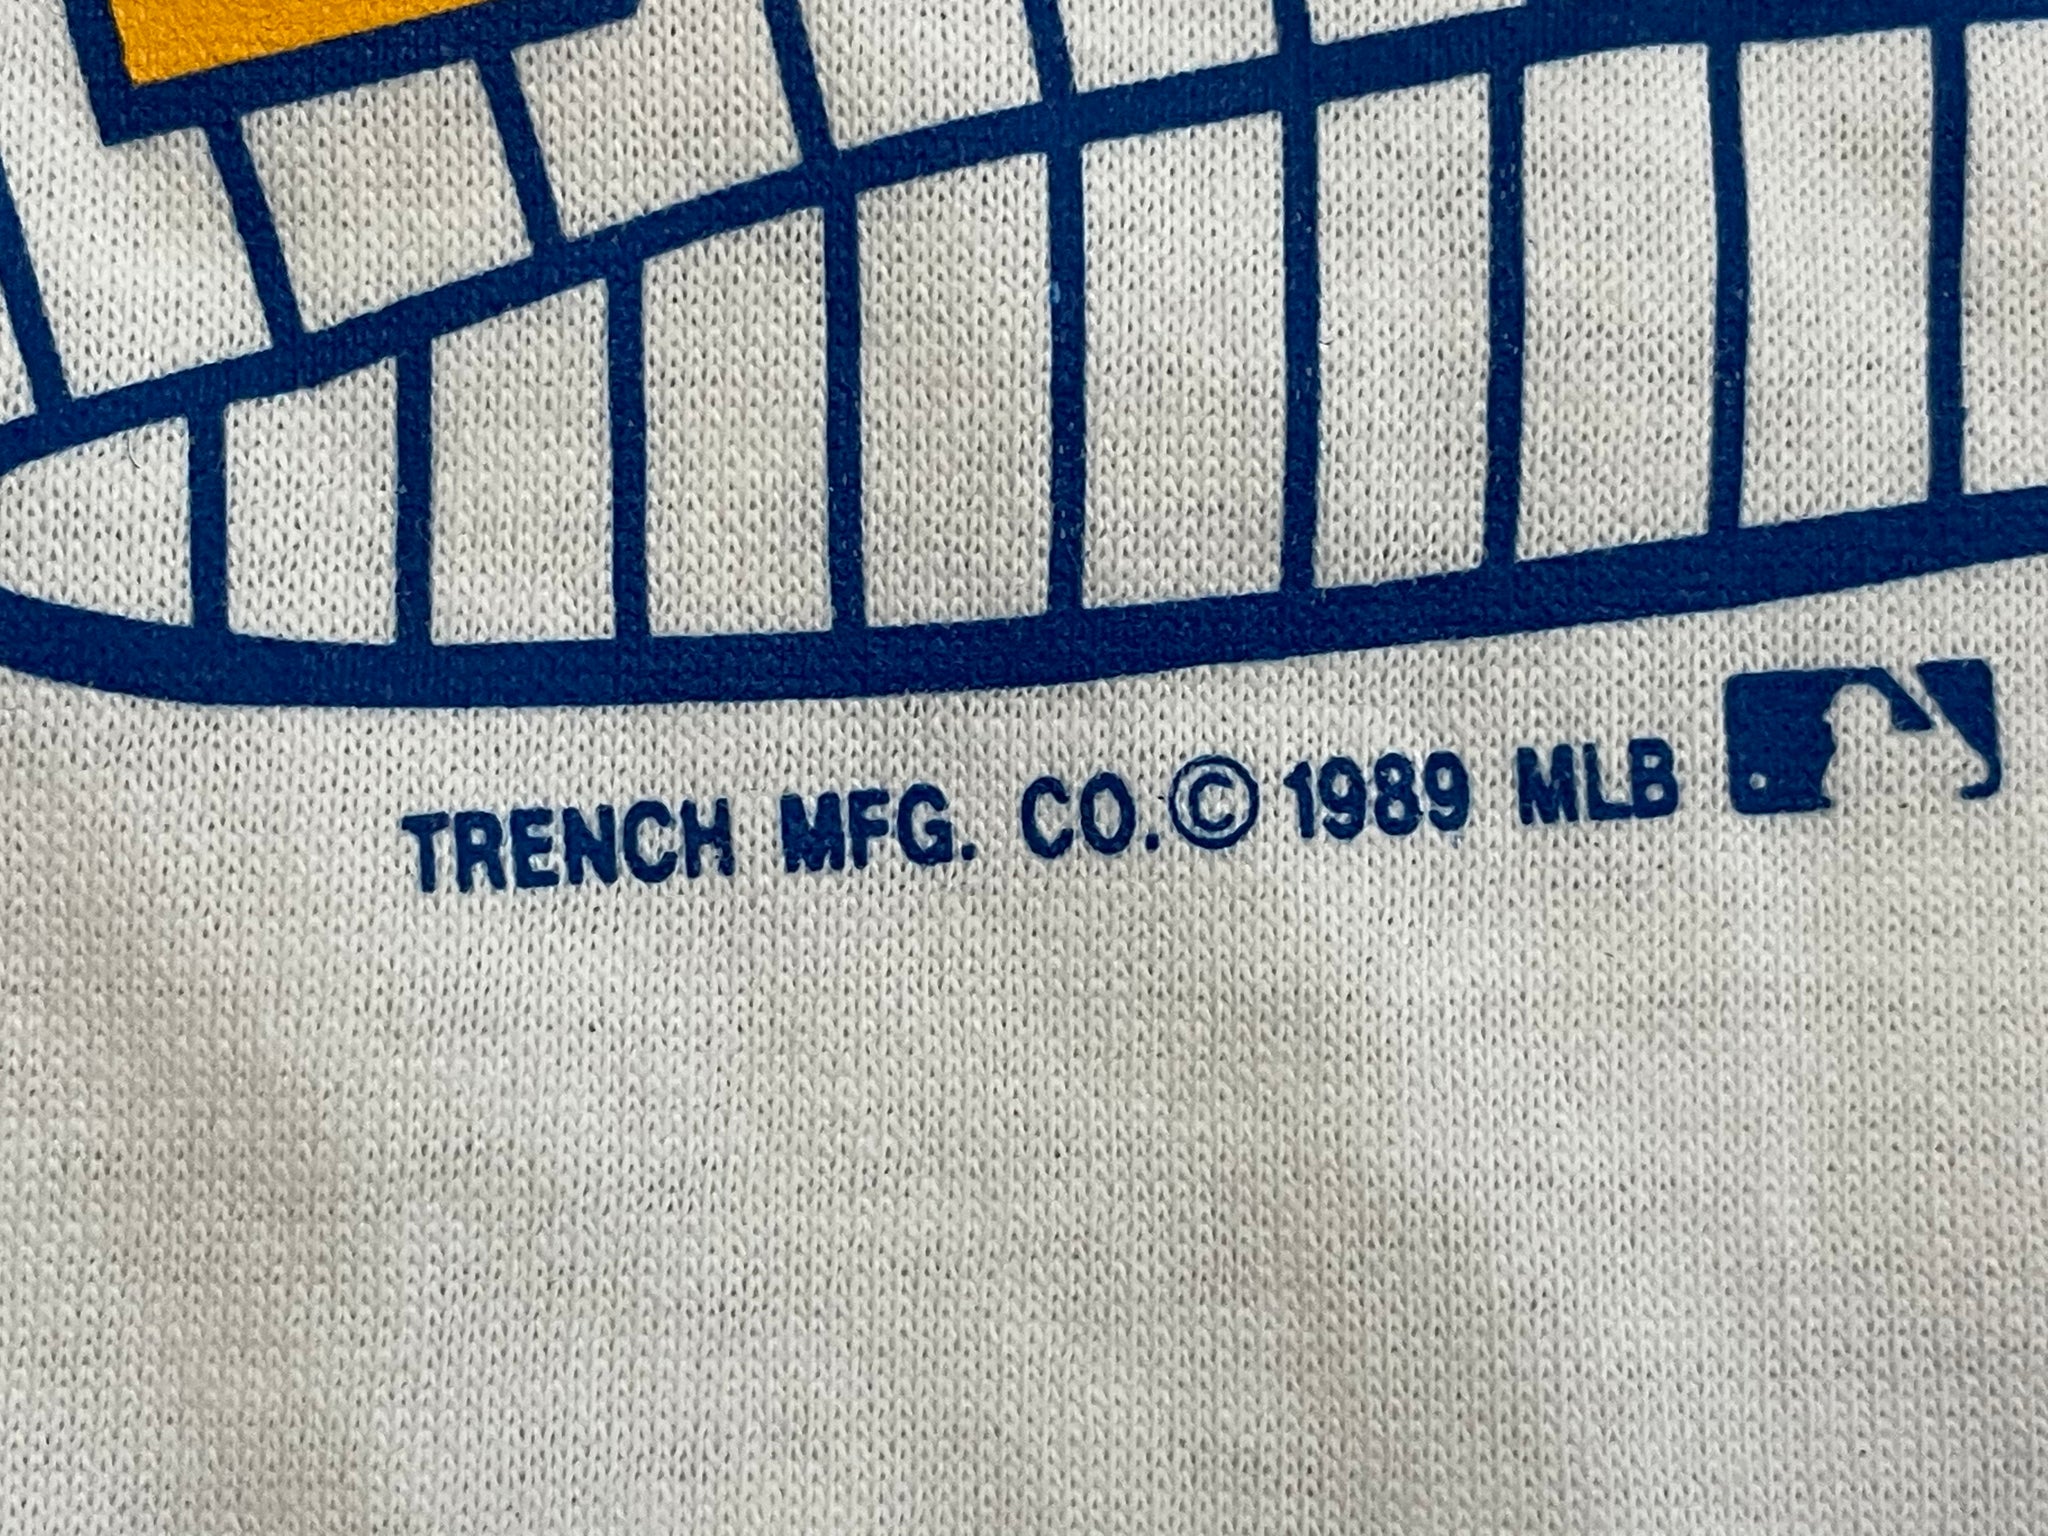 Vintage Milwaukee Brewers Trench Baseball Tshirt, Size Large – Stuck In The  90s Sports